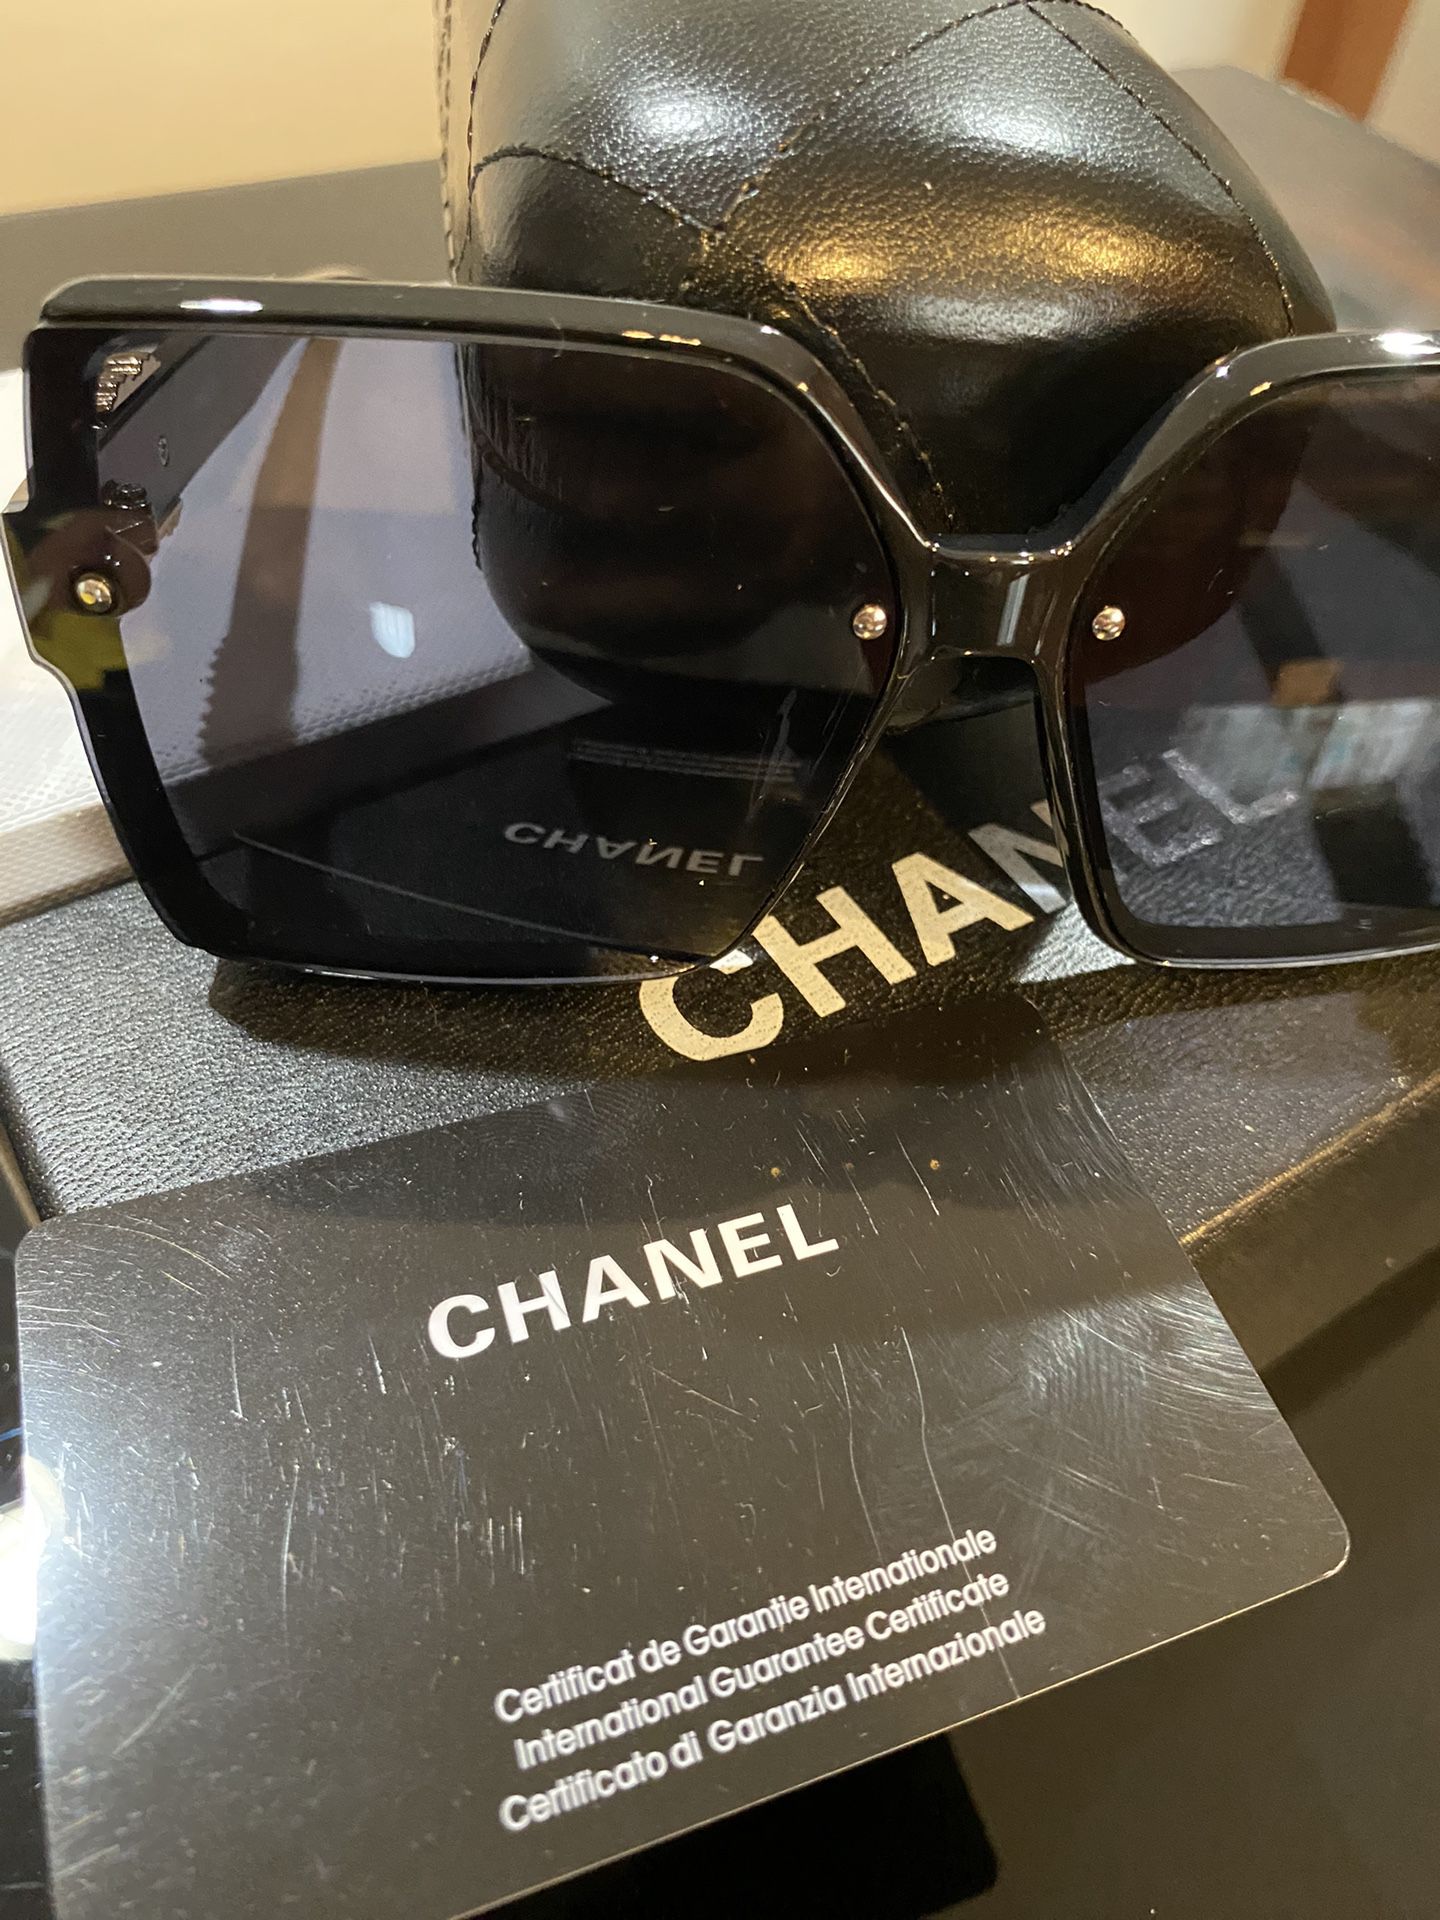 CHANEL for Sale in South Gate, CA - OfferUp